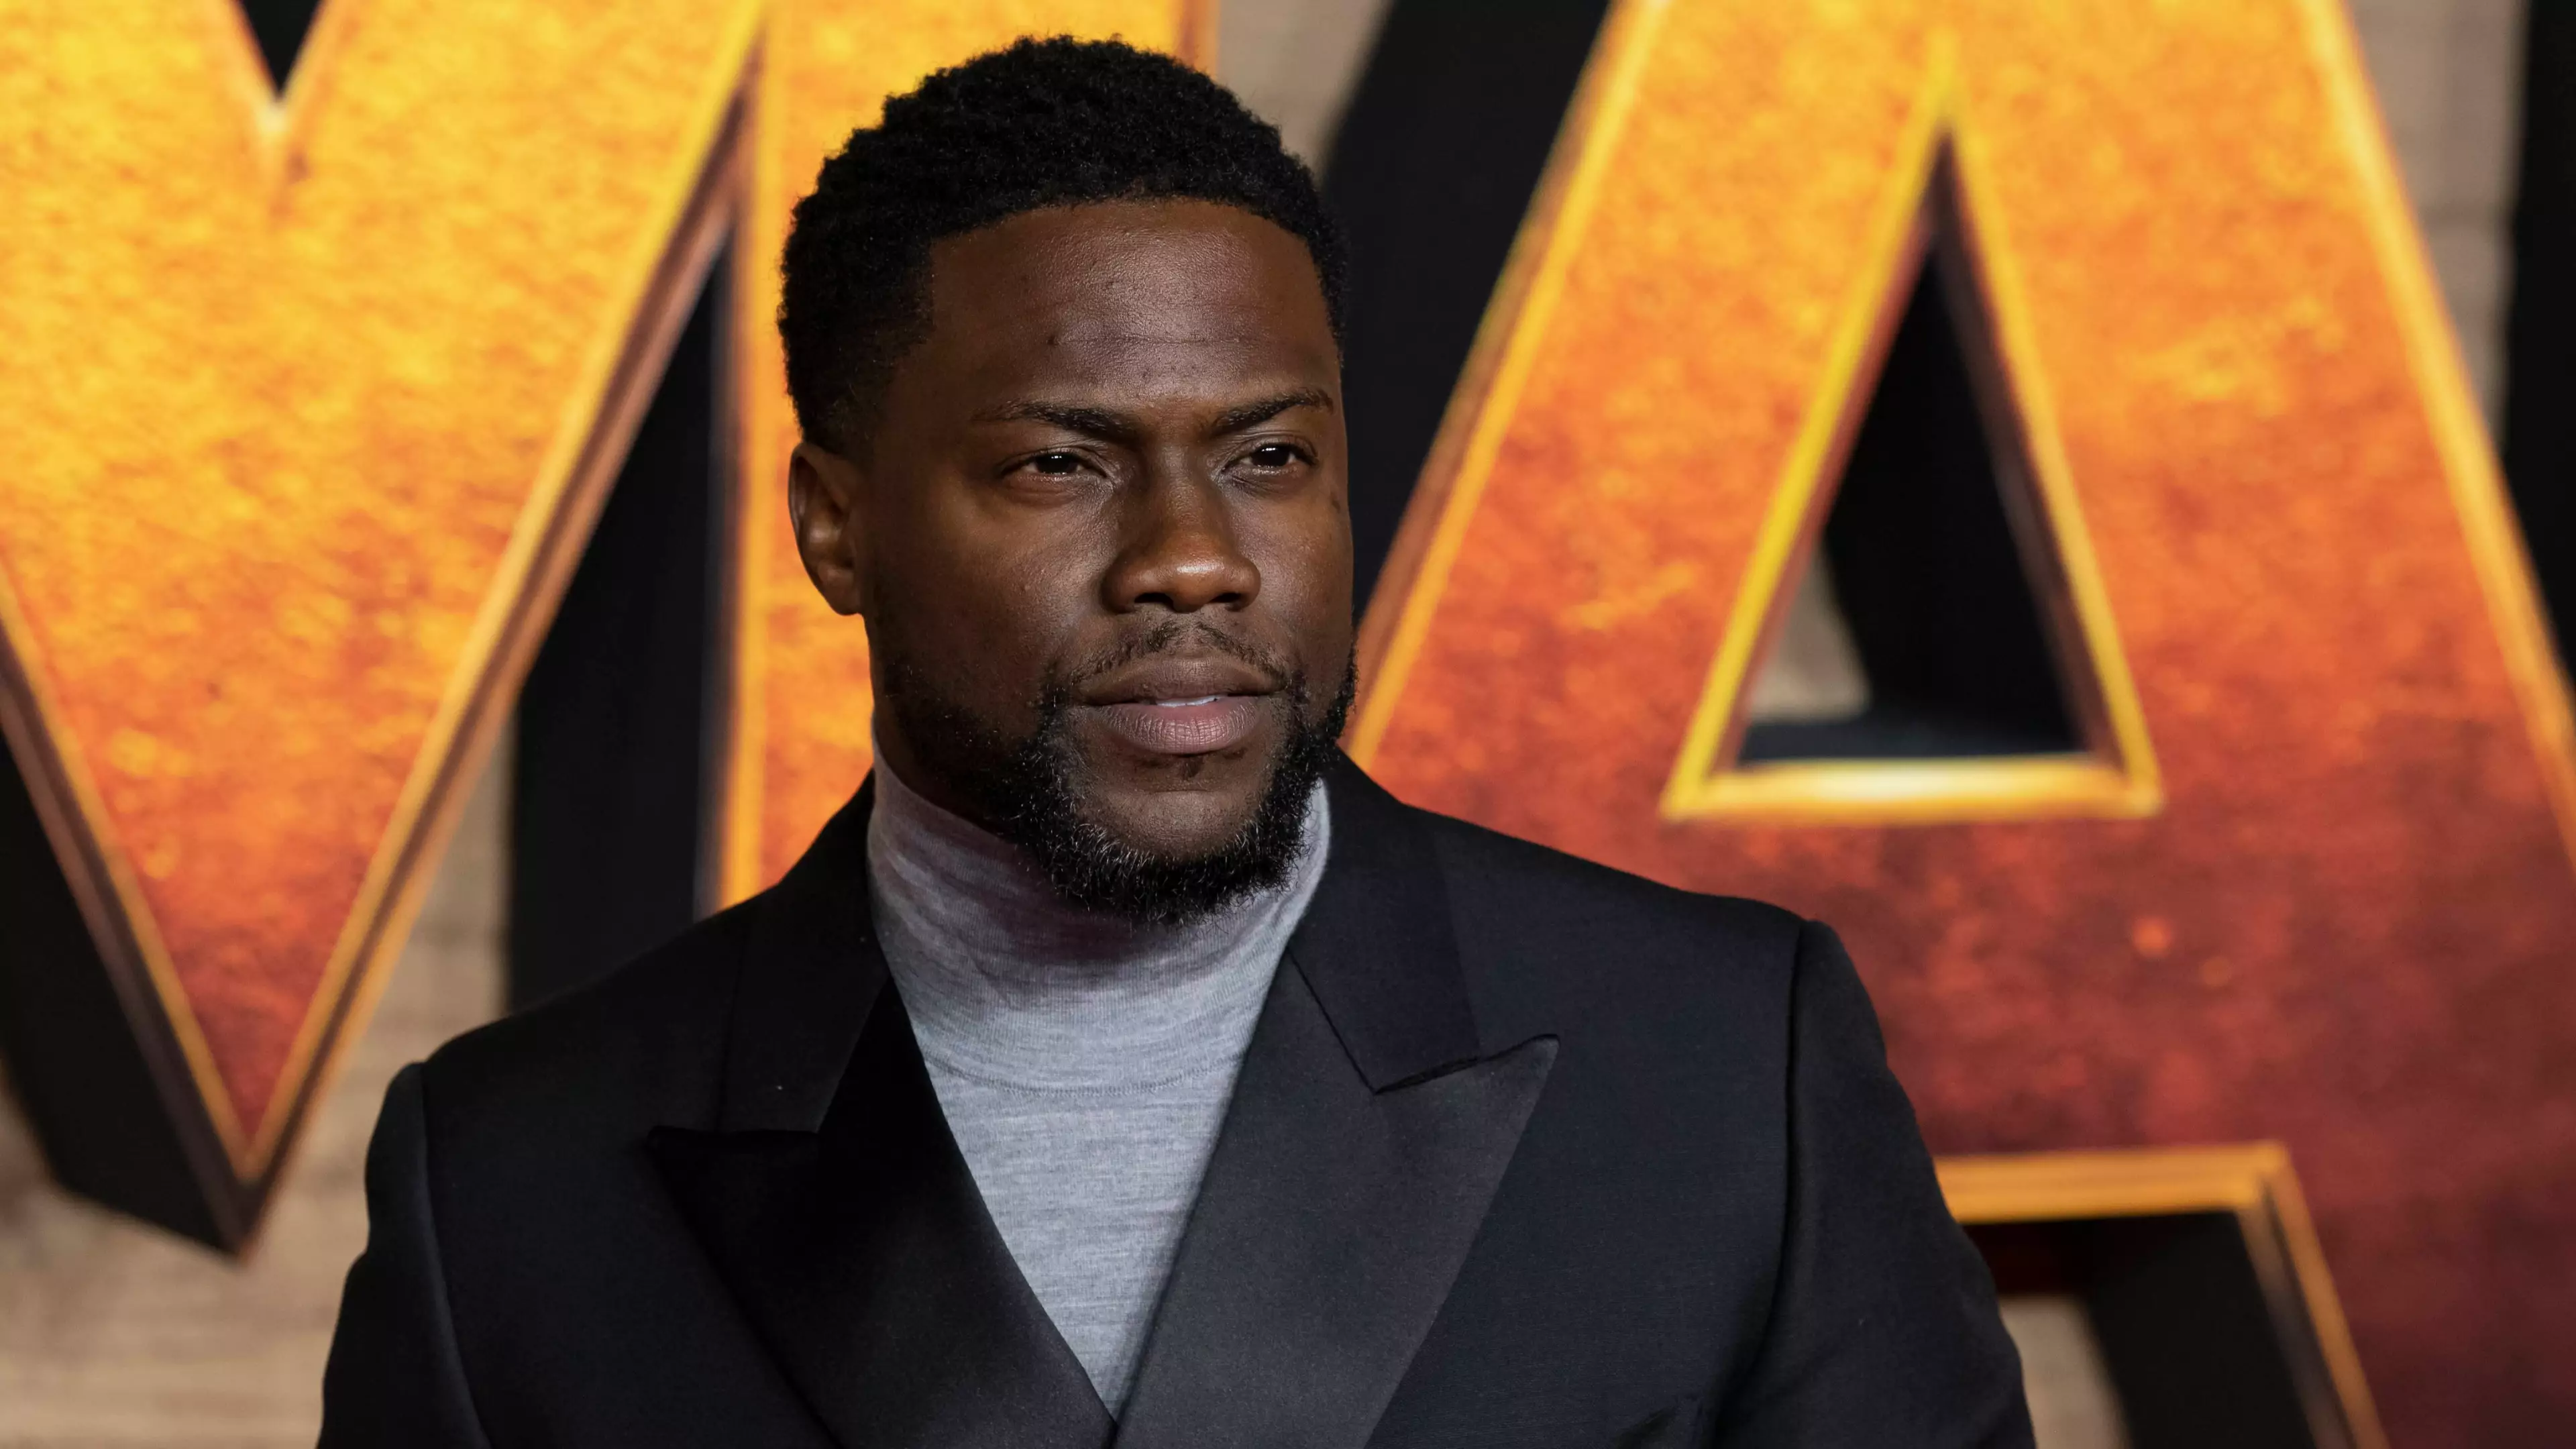 Kevin Hart To Feature In Six-Part Netflix Documentary About His Life